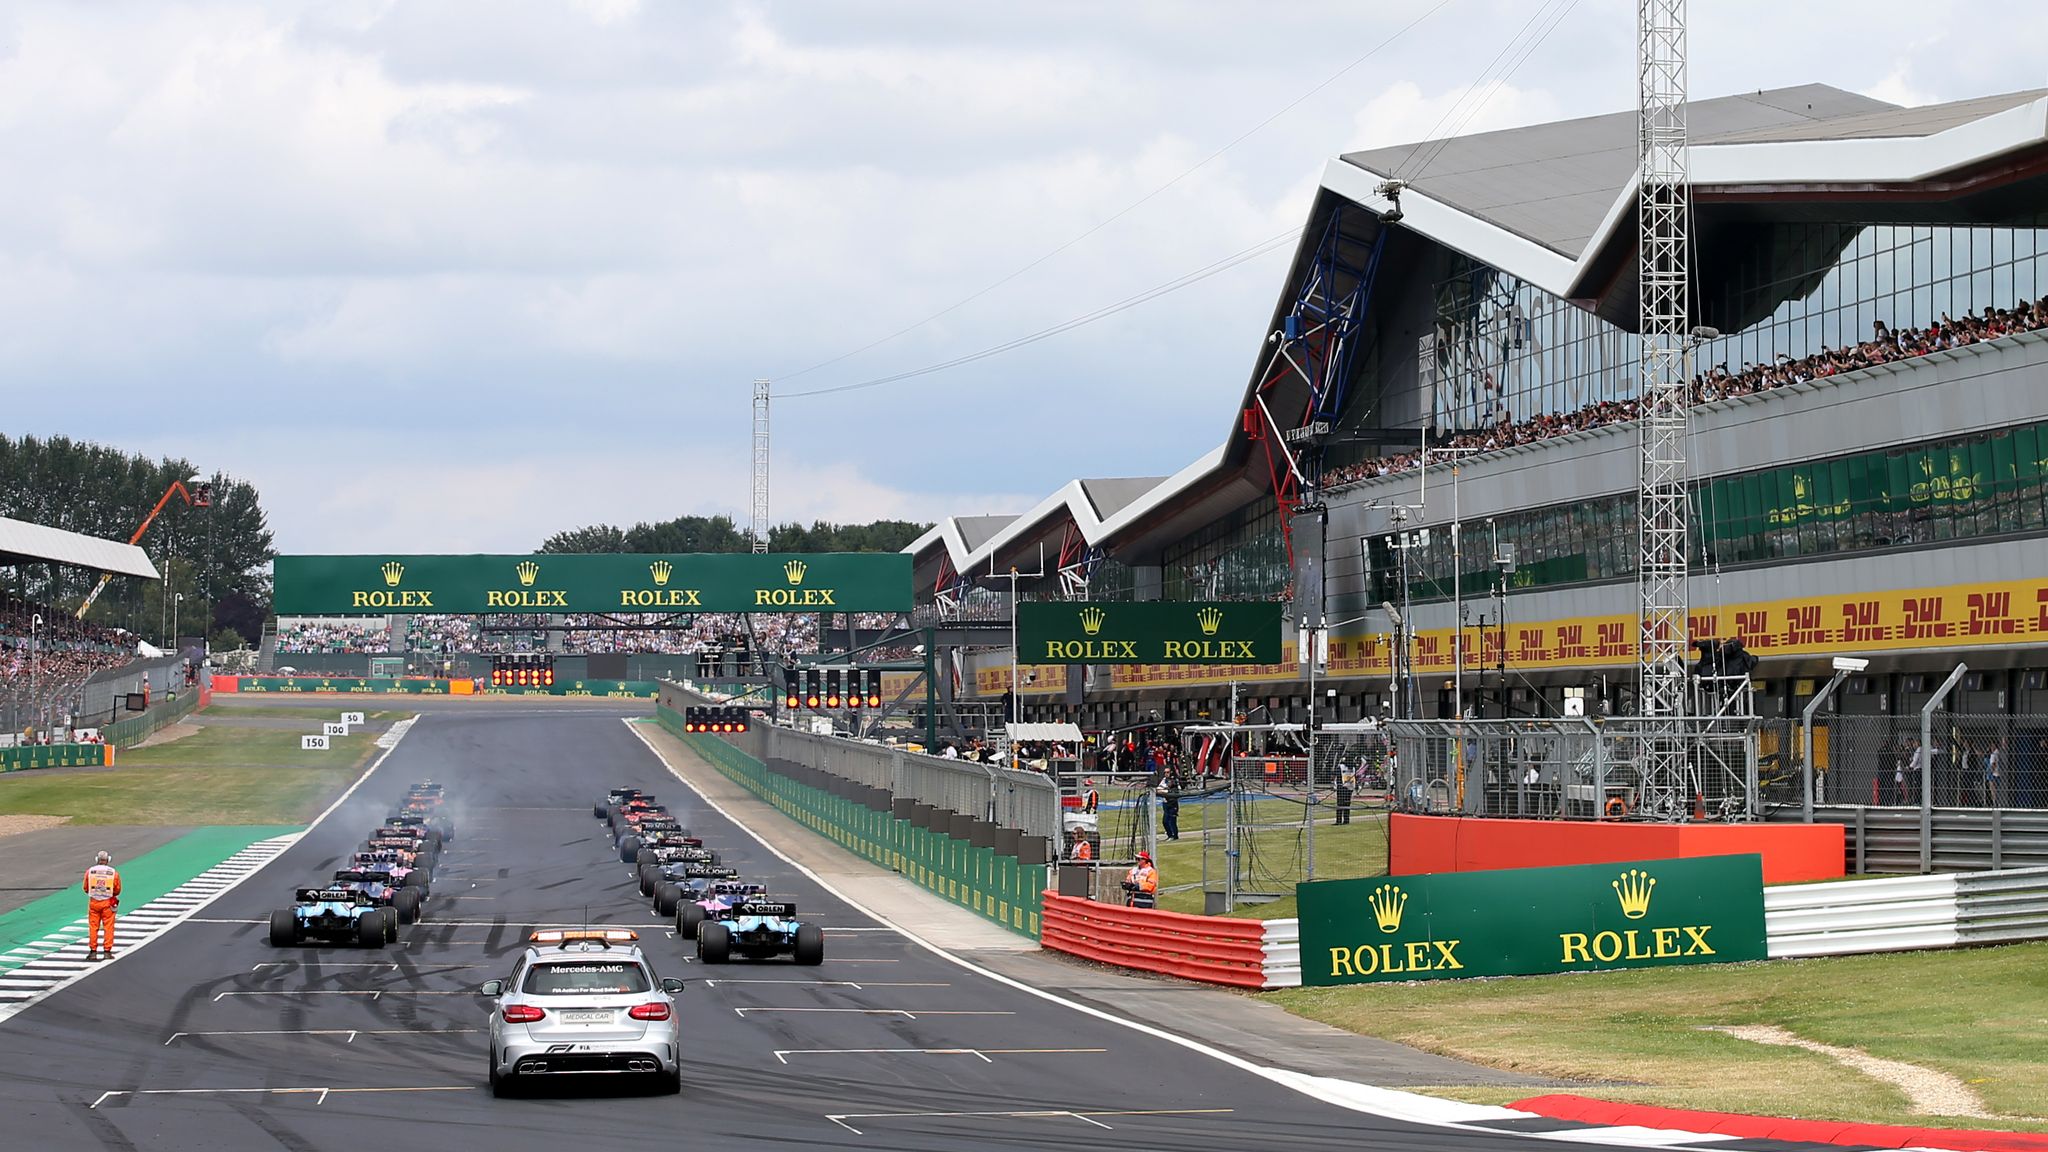 Silverstone could host two F1 races in 2021